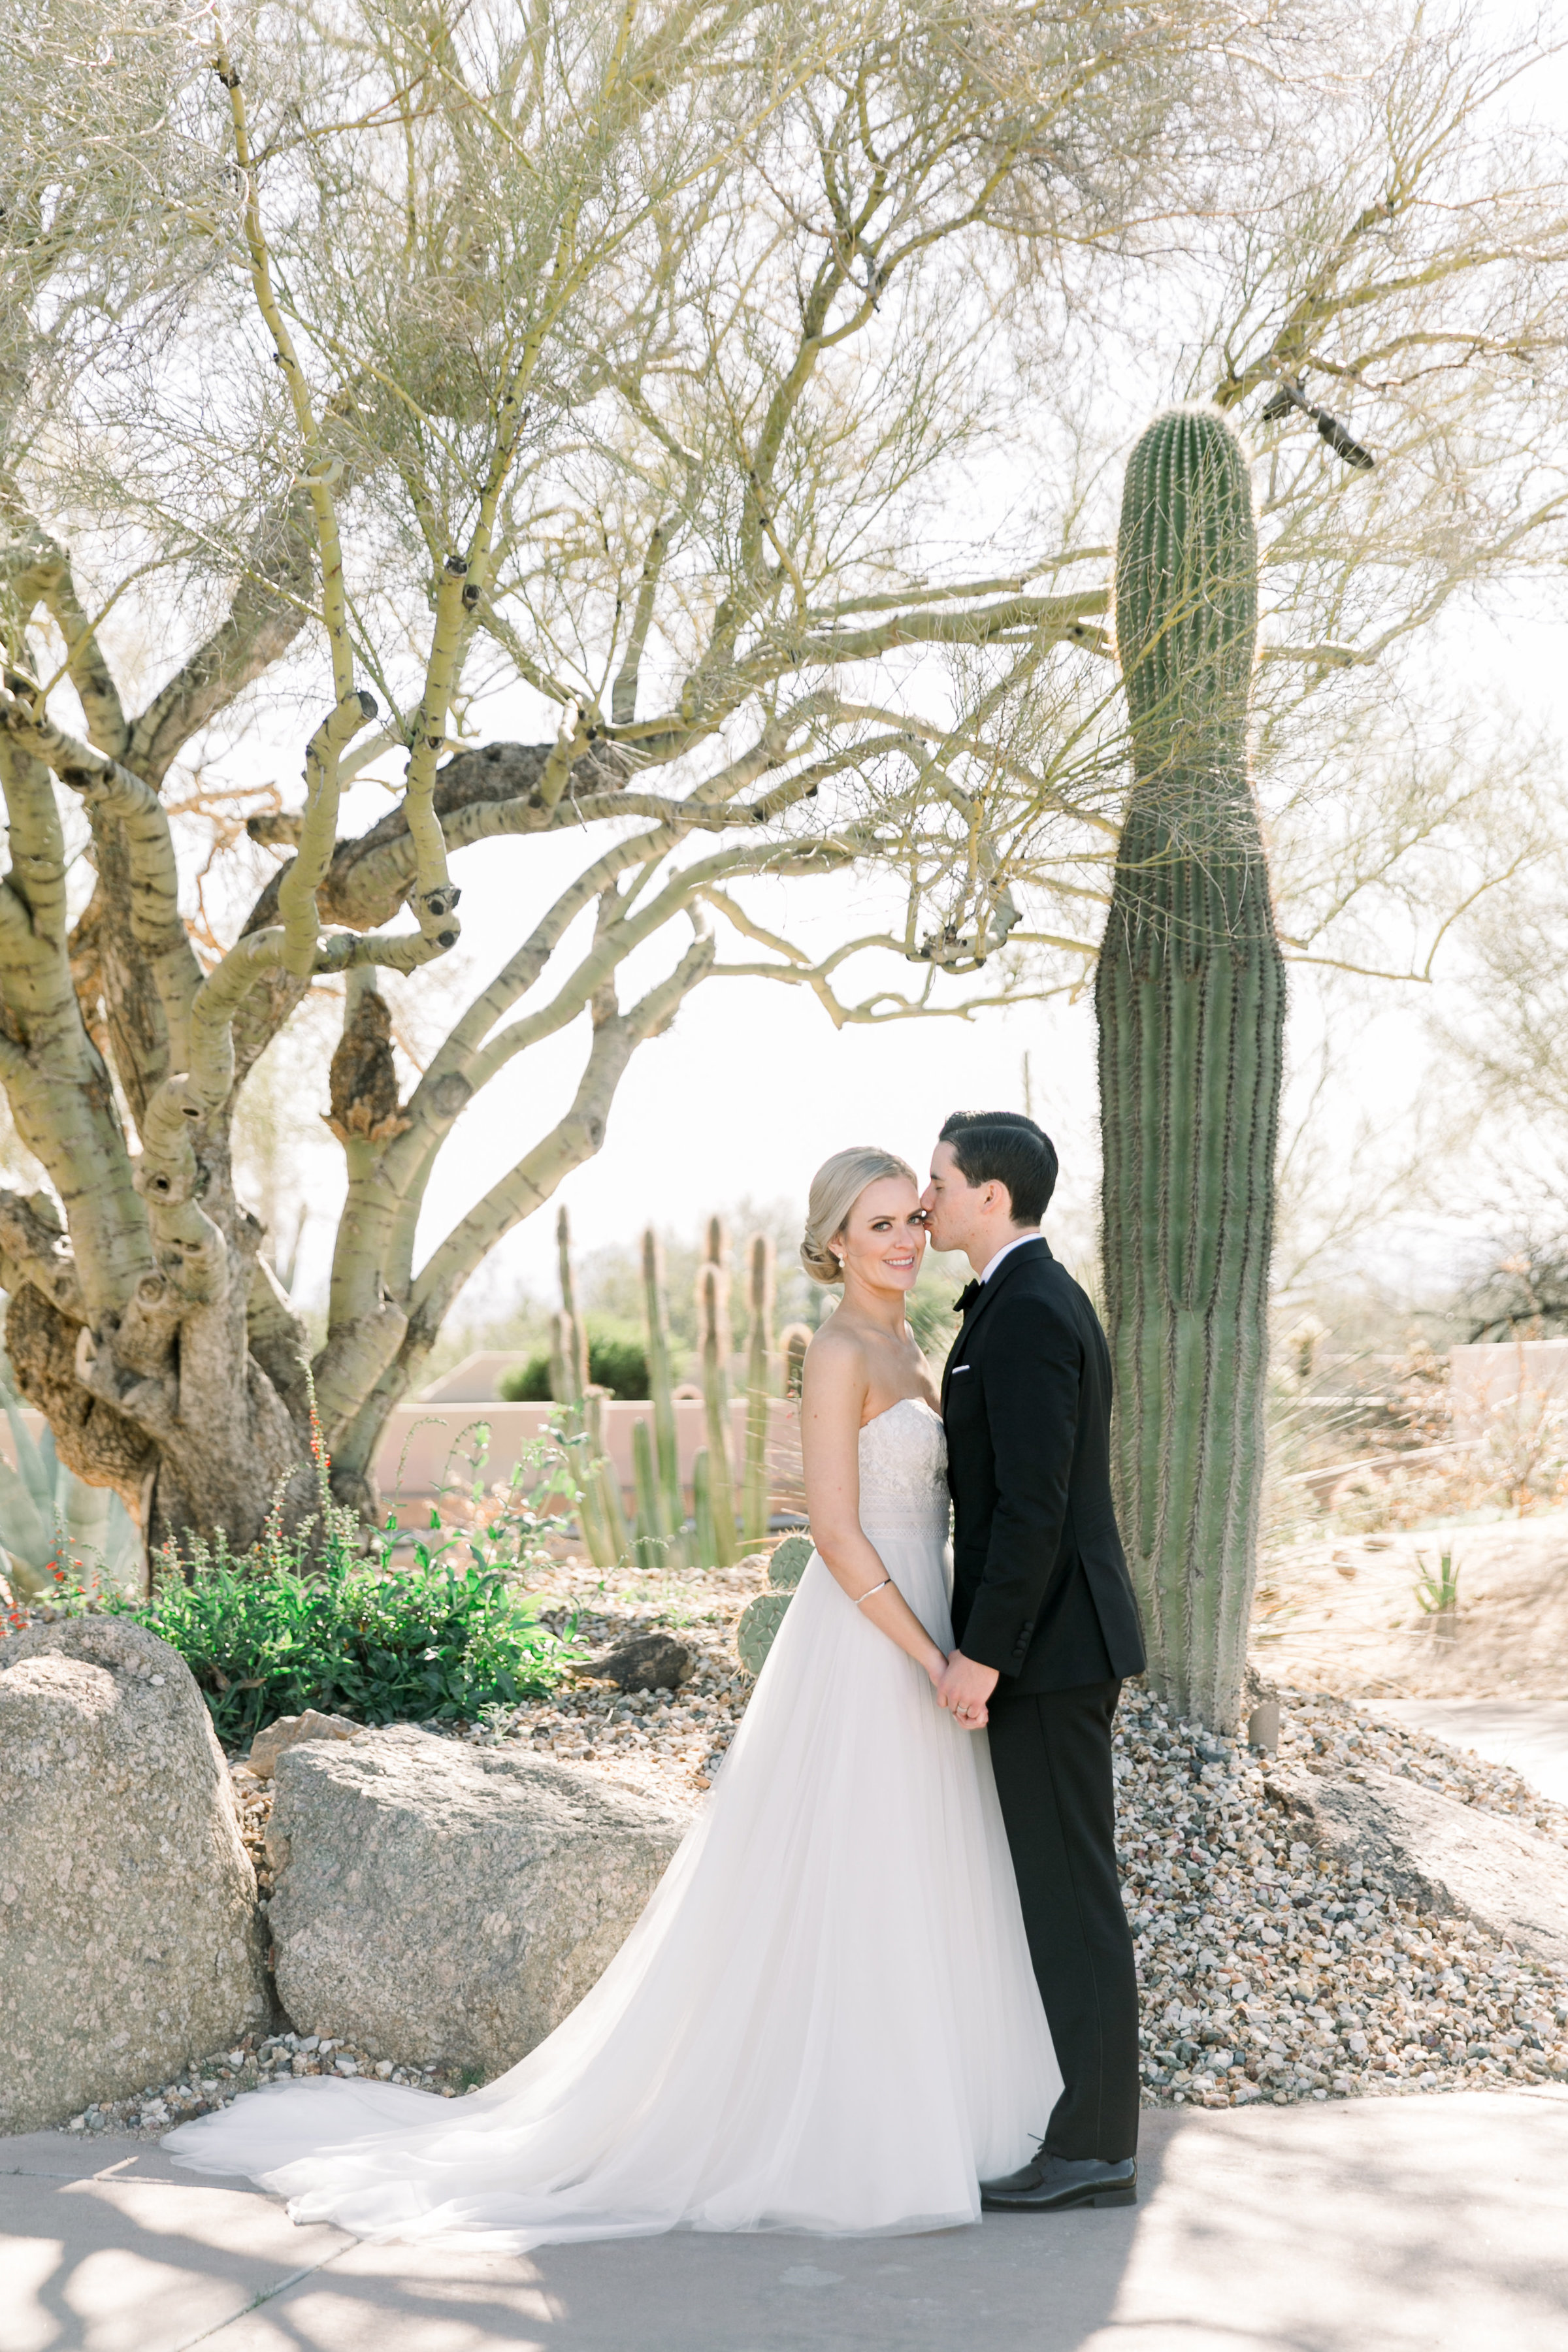 Karlie Colleen Photography - Arizona Wedding at The Troon Scottsdale Country Club - Paige & Shane -152